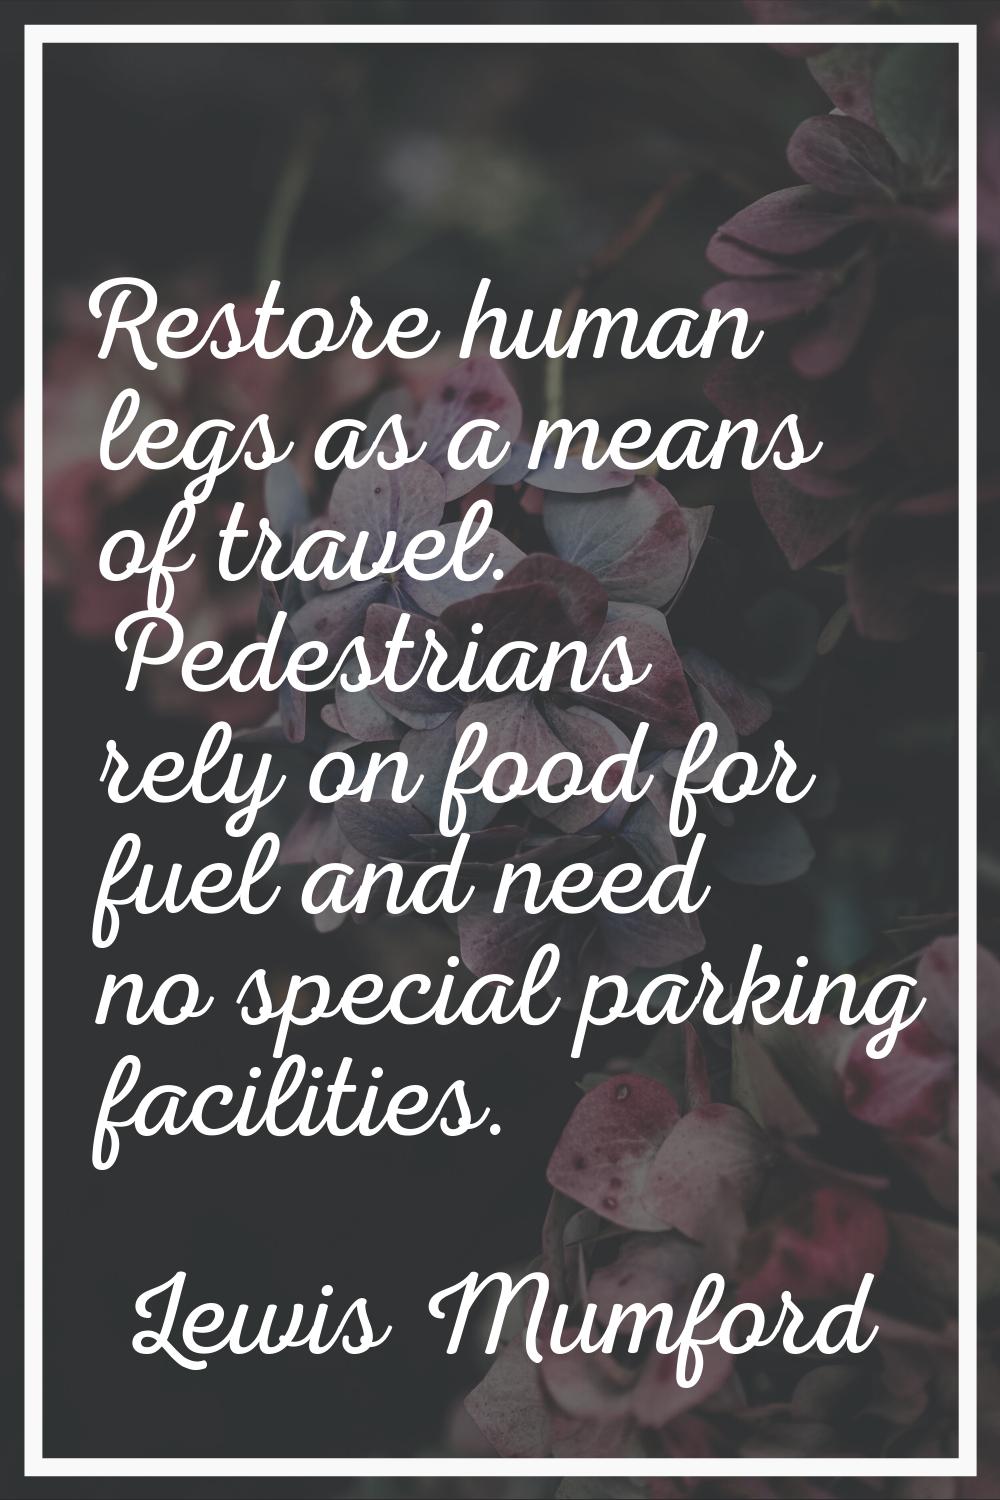 Restore human legs as a means of travel. Pedestrians rely on food for fuel and need no special park